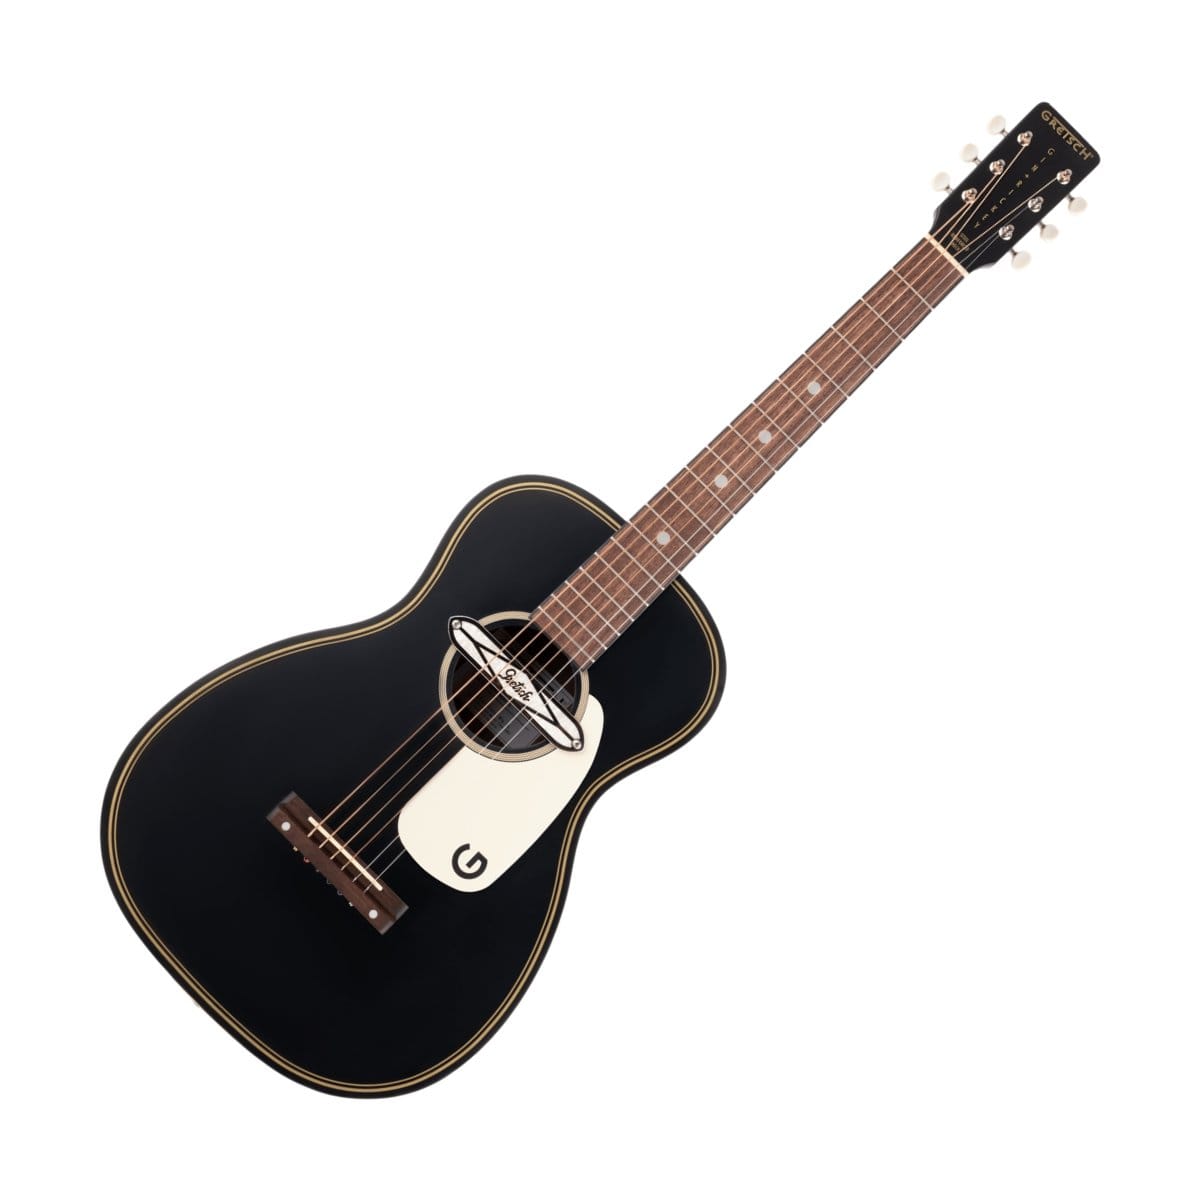 Gretsch Guitar Gretsch G9520E Gin Rickey Acoustic/Electric Parlor Guitar with Soundhole Pickup - Byron Music